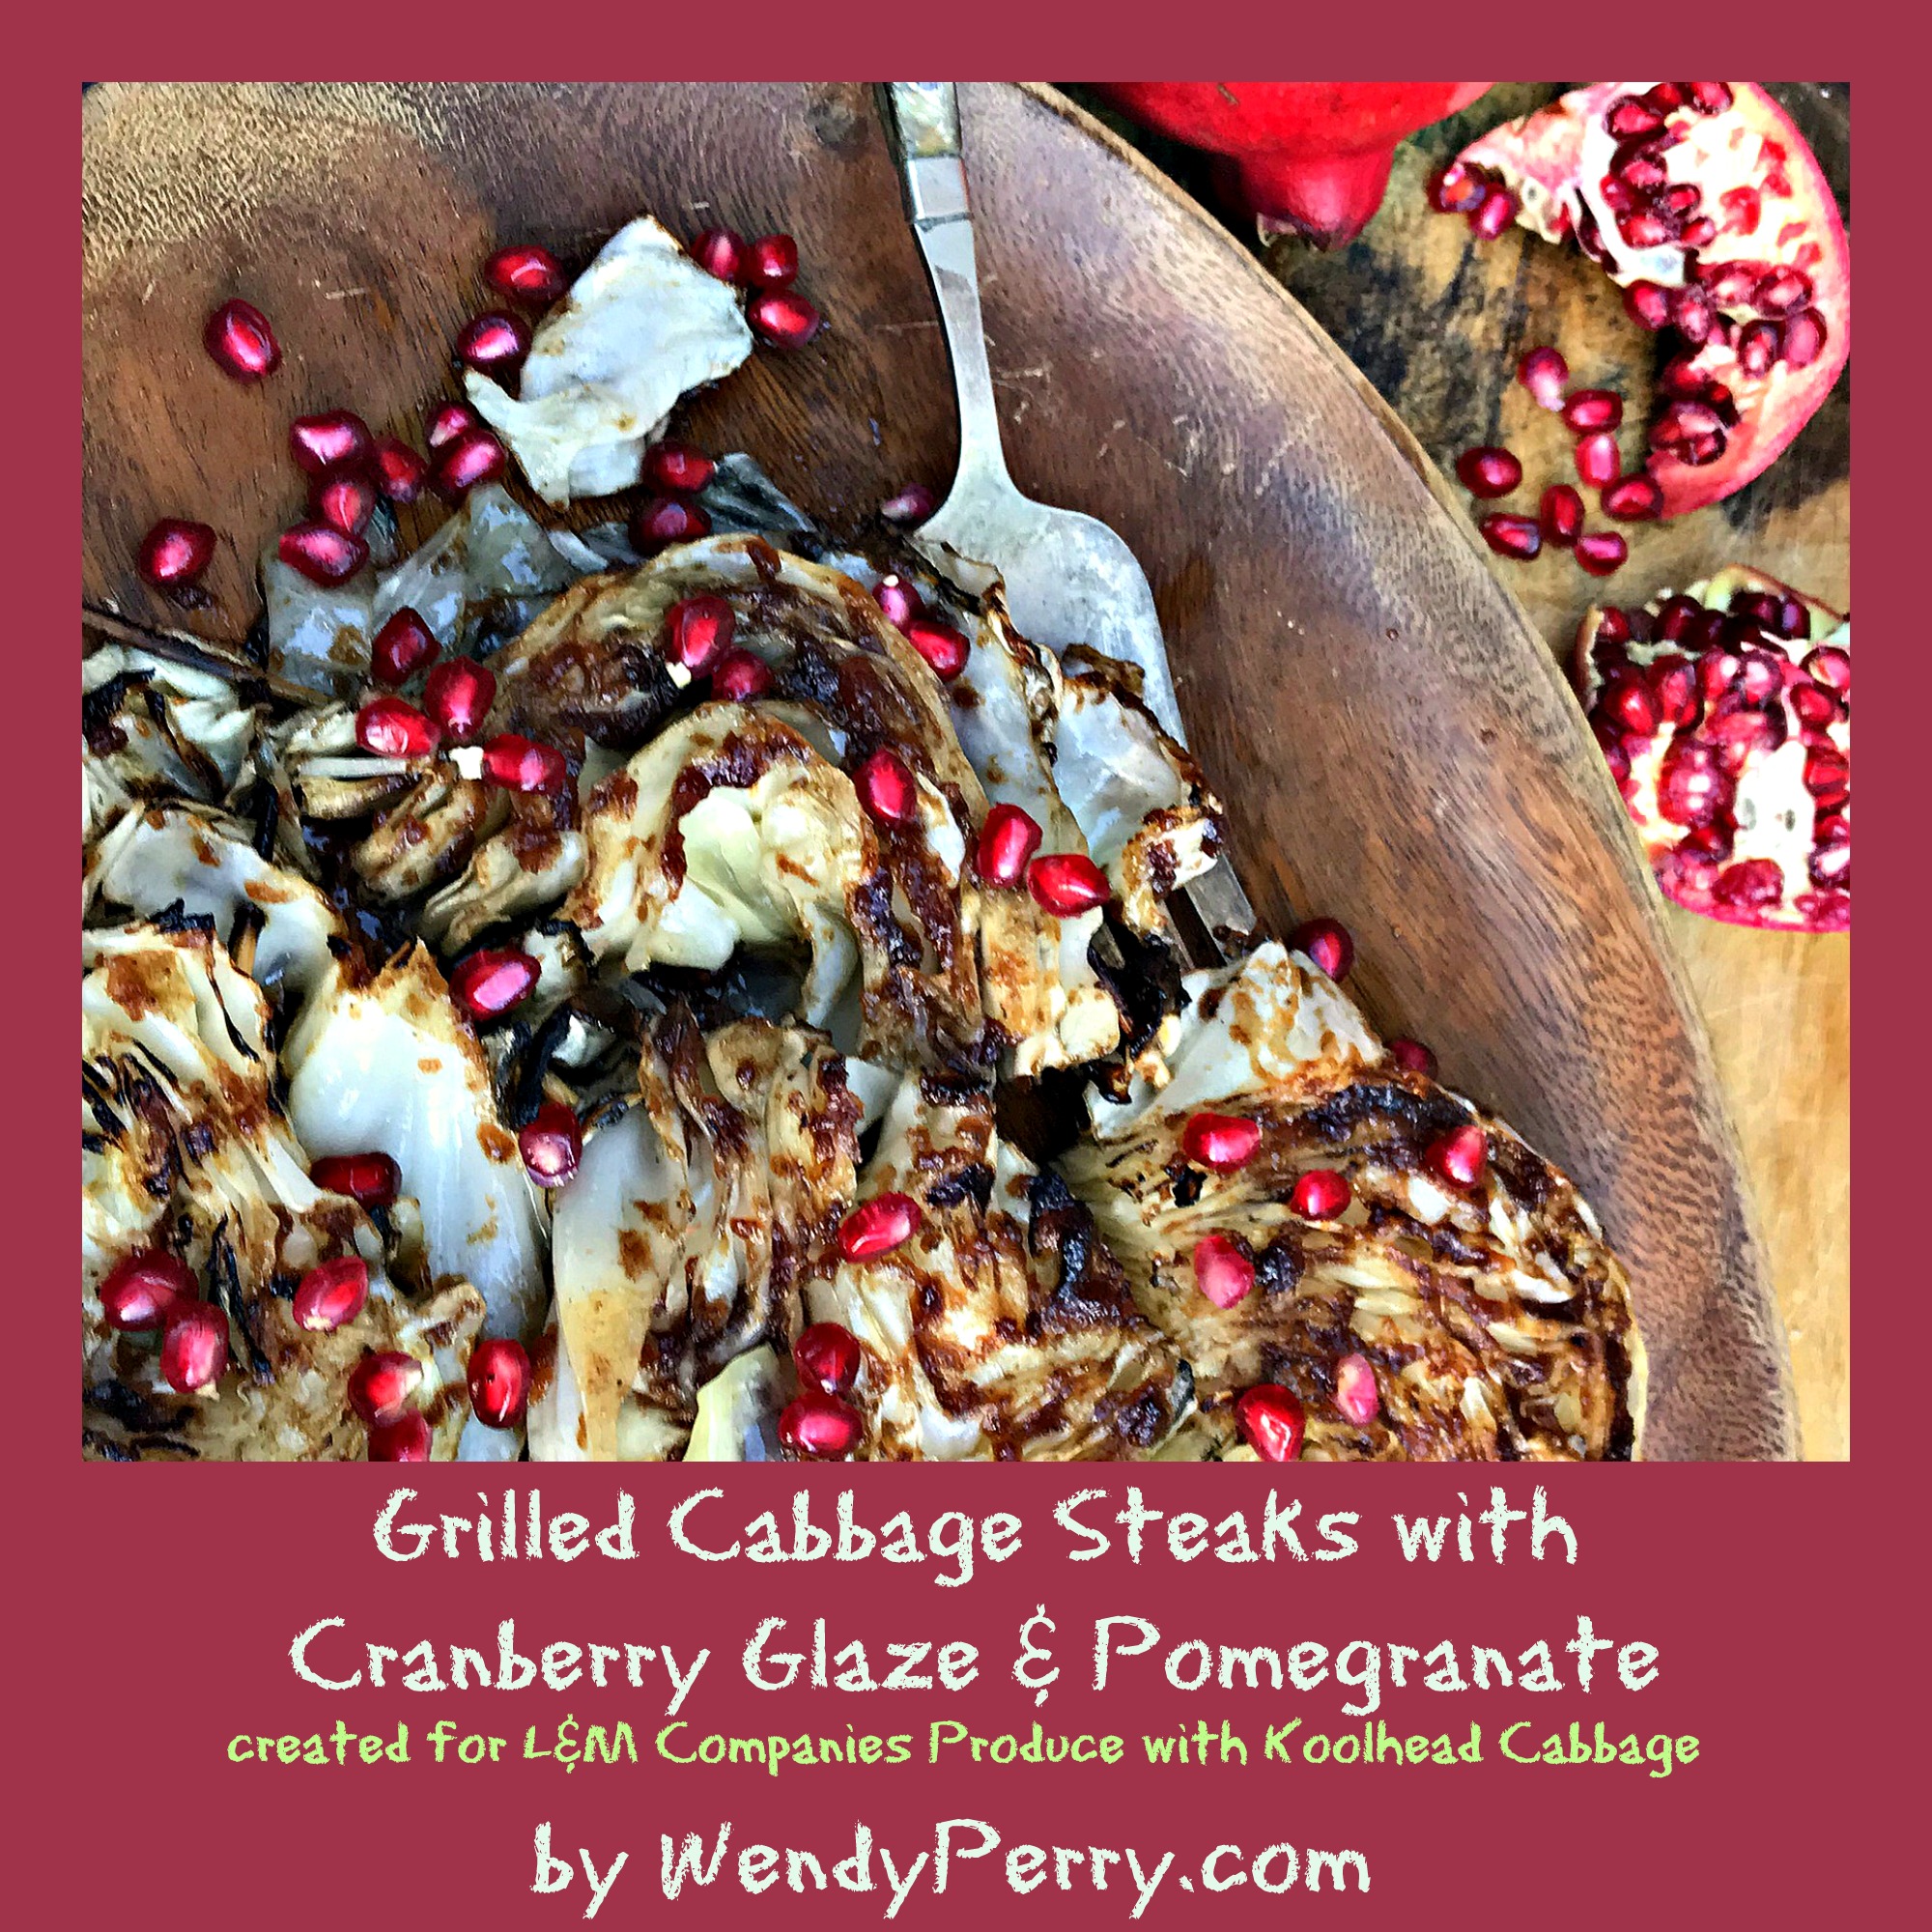 Grilled Koolheads Cabbage Steaks with Cranberry Glaze & Pomegranate